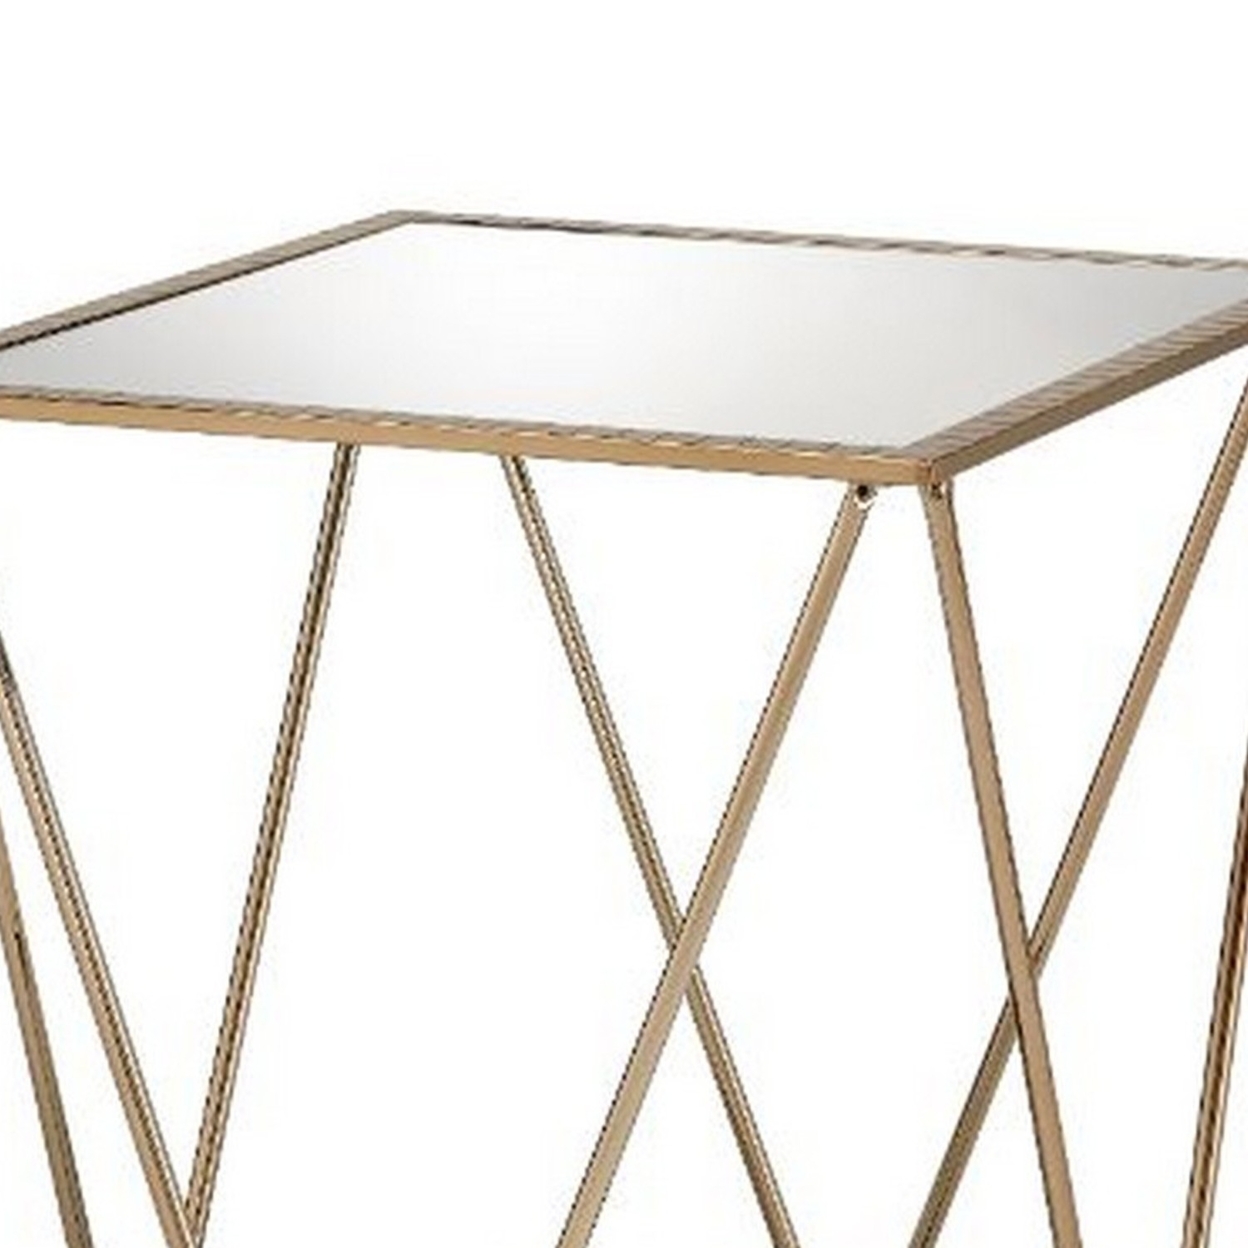 End Table With Mirror Top And Open Geometric Base, Champagne Gold- Saltoro Sherpi